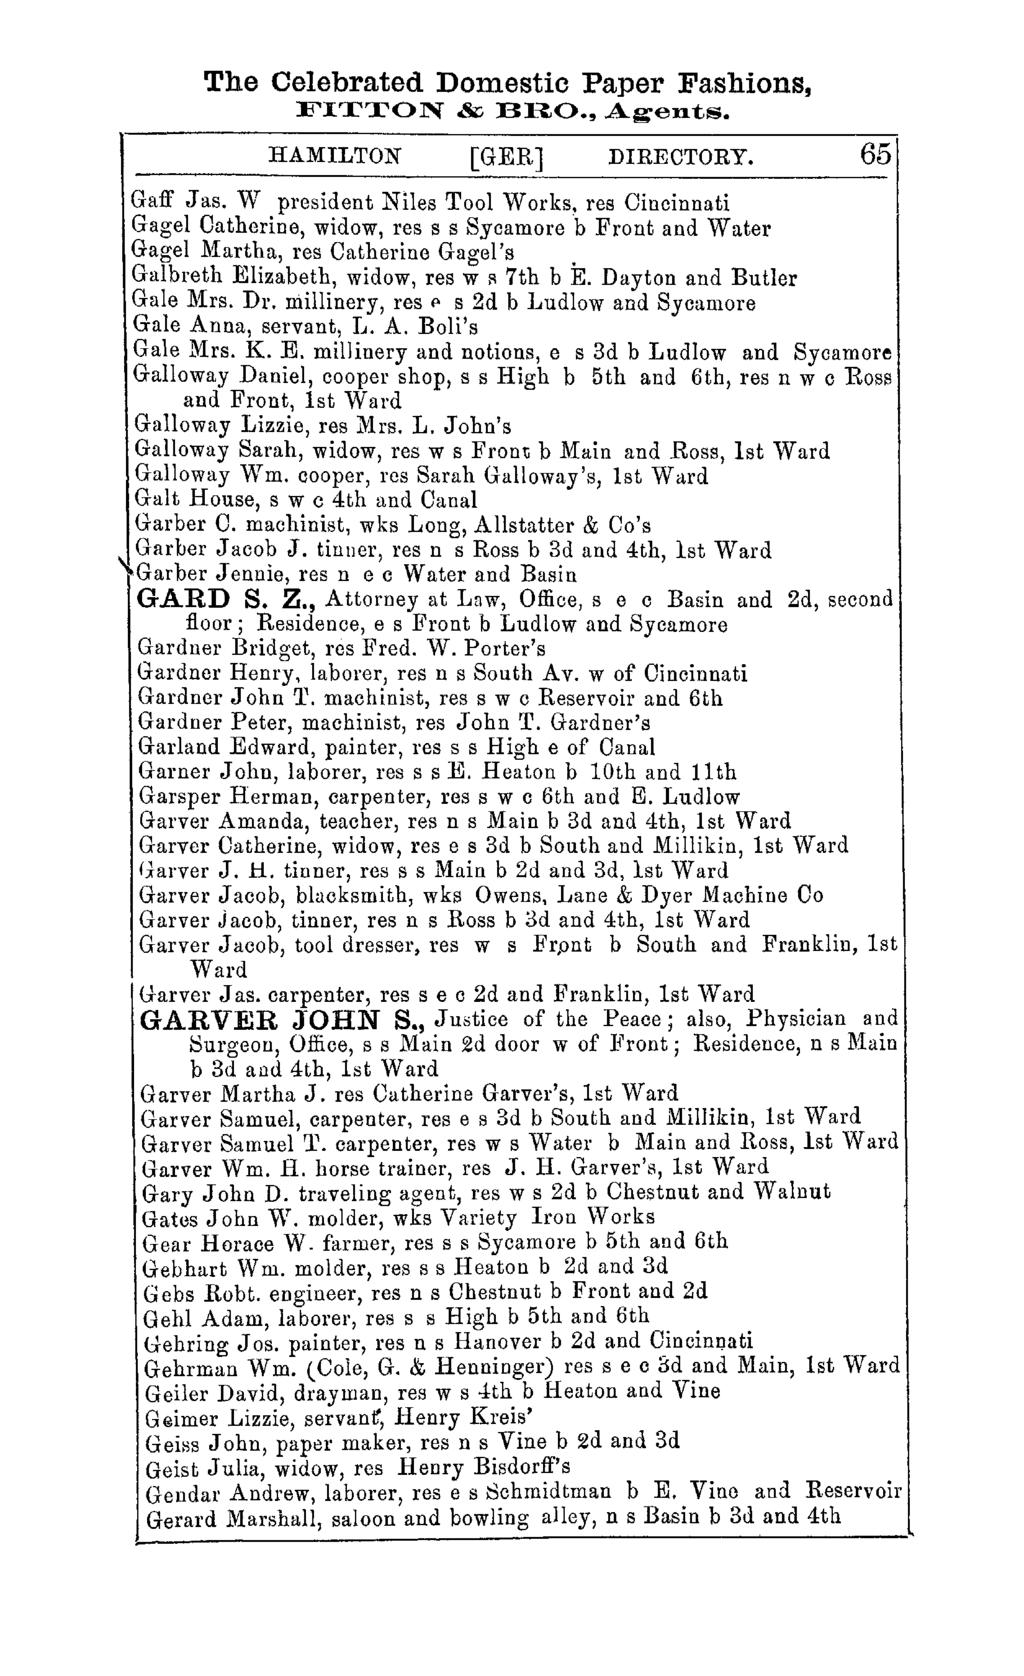 The Celebrated Domestic Paper Fashions, FITTON & BRO., Agents. HAMILTON [GER] DIRECTORY. Gaff J as.